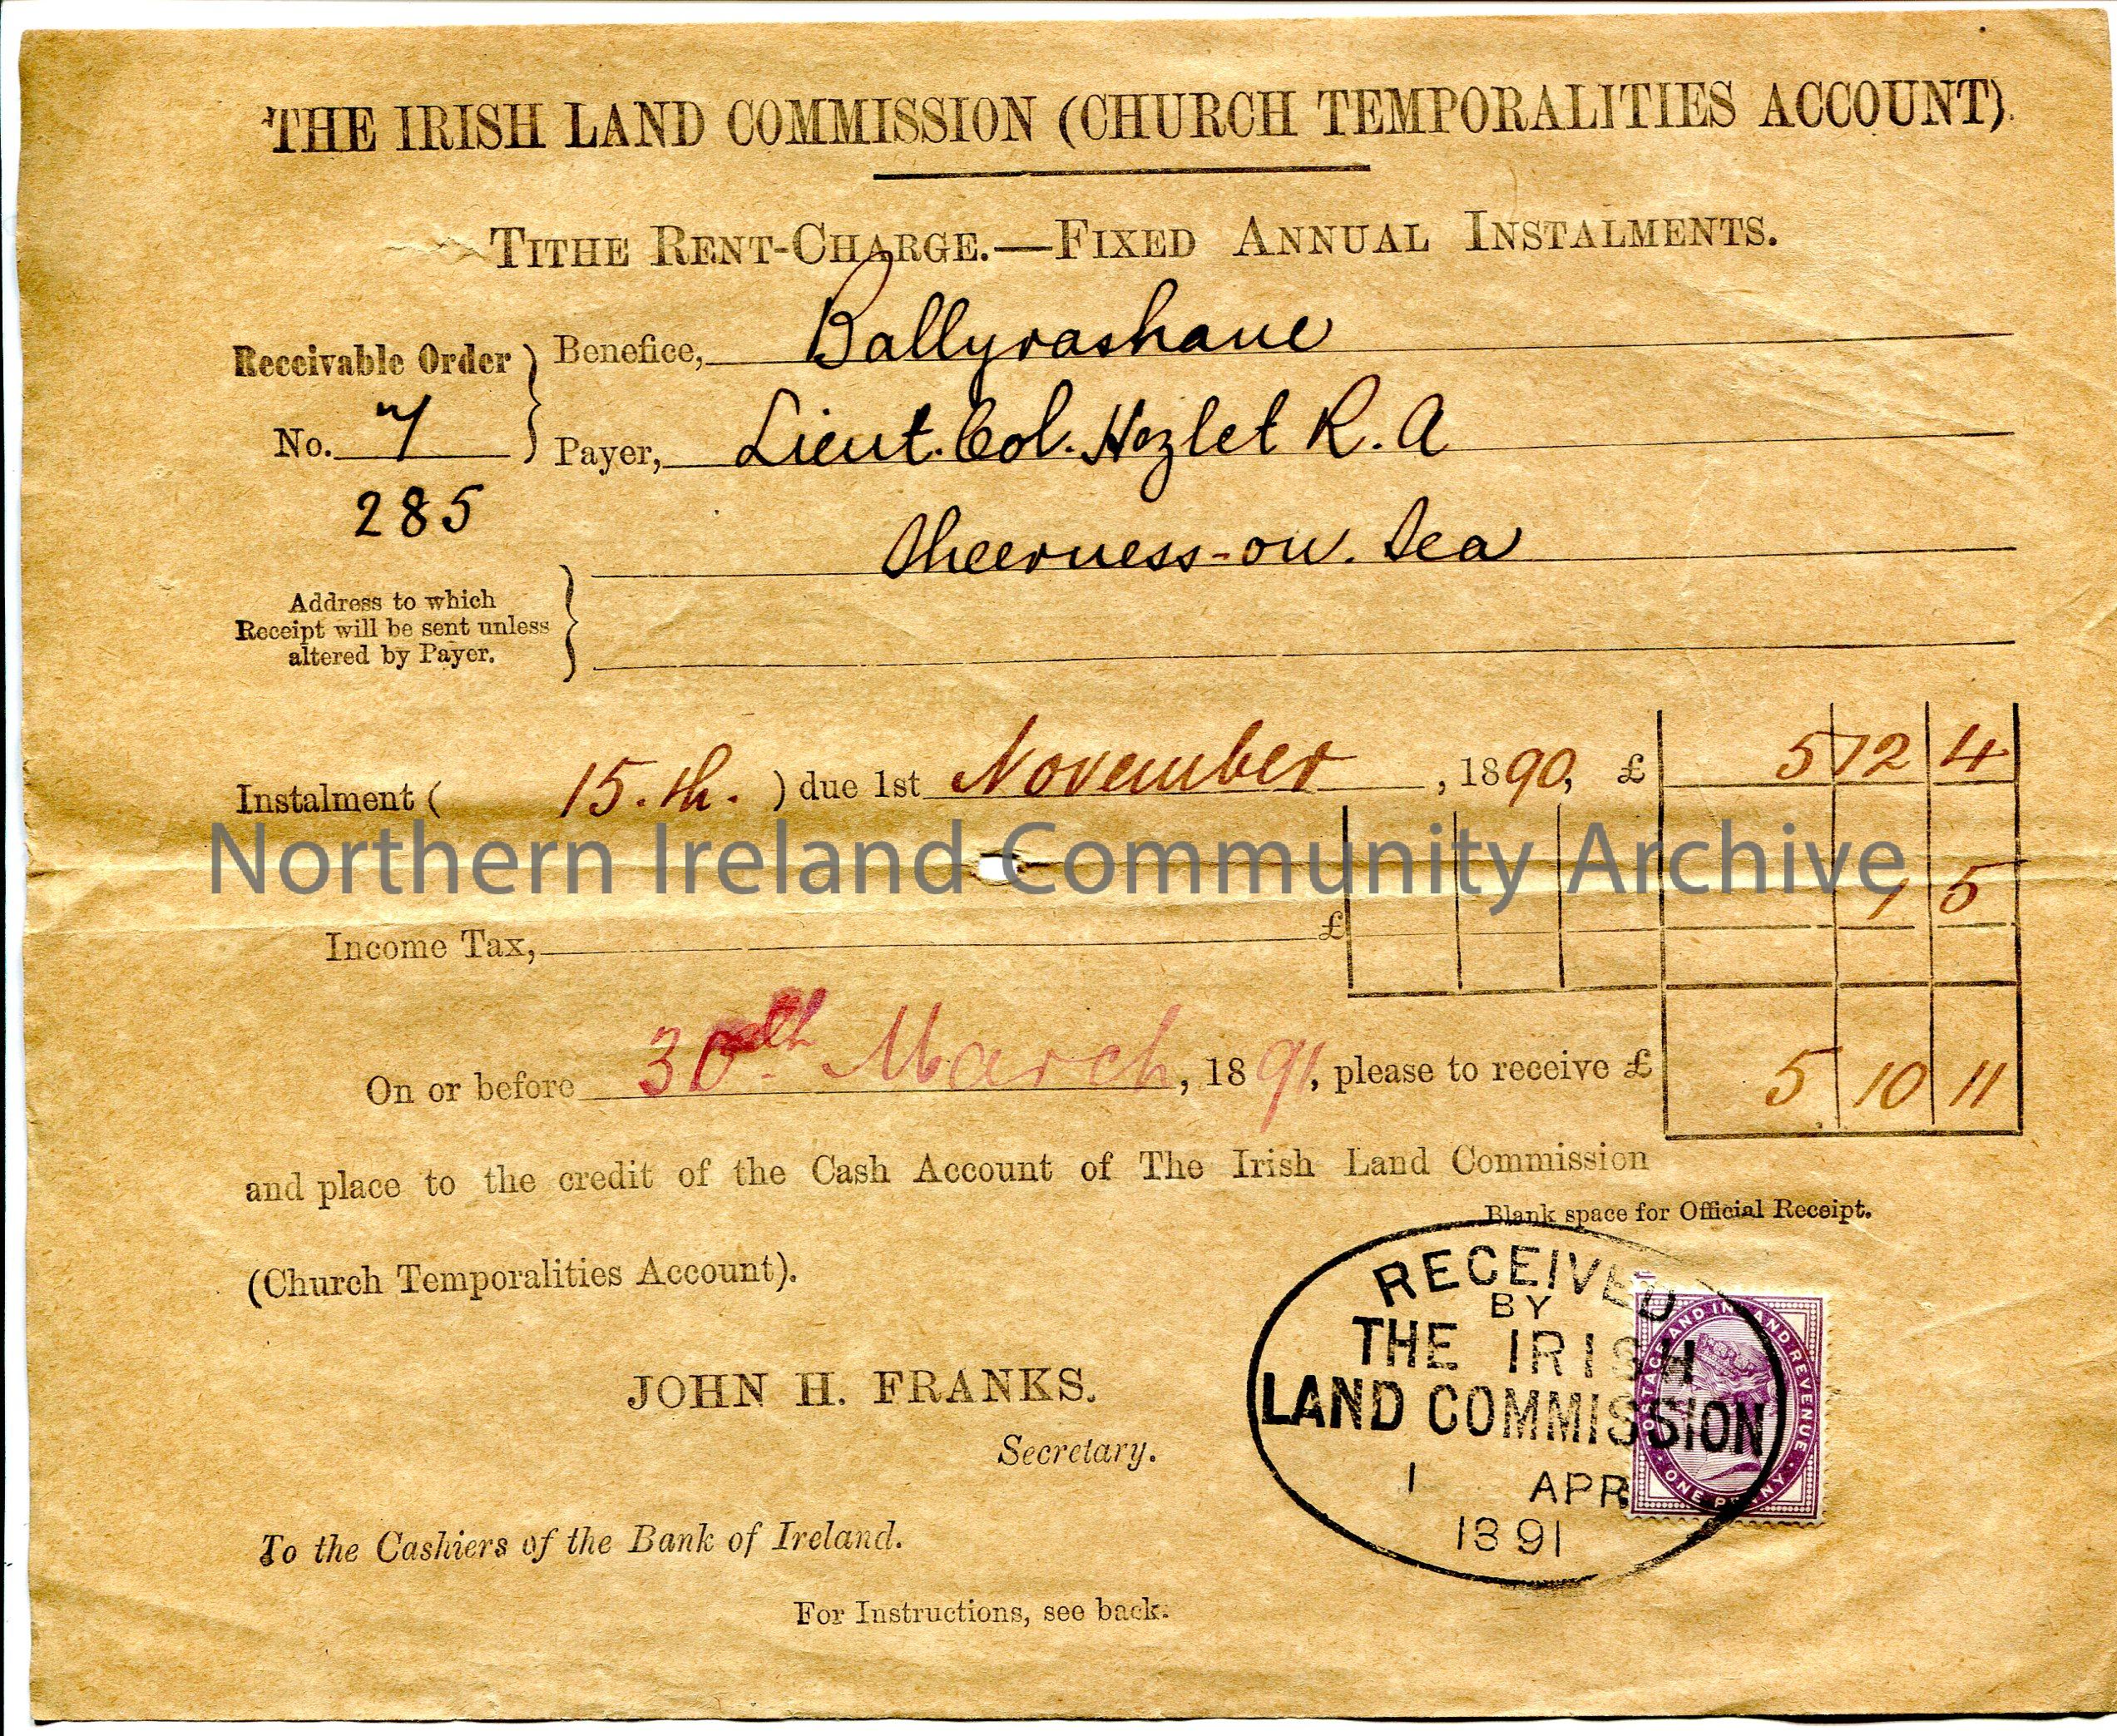 Handwritten Receivable Order, No. 7 285, for payment of £5.10.11 due 15th November 1890 to credit the Cash Account of The Irish Land Commission (…